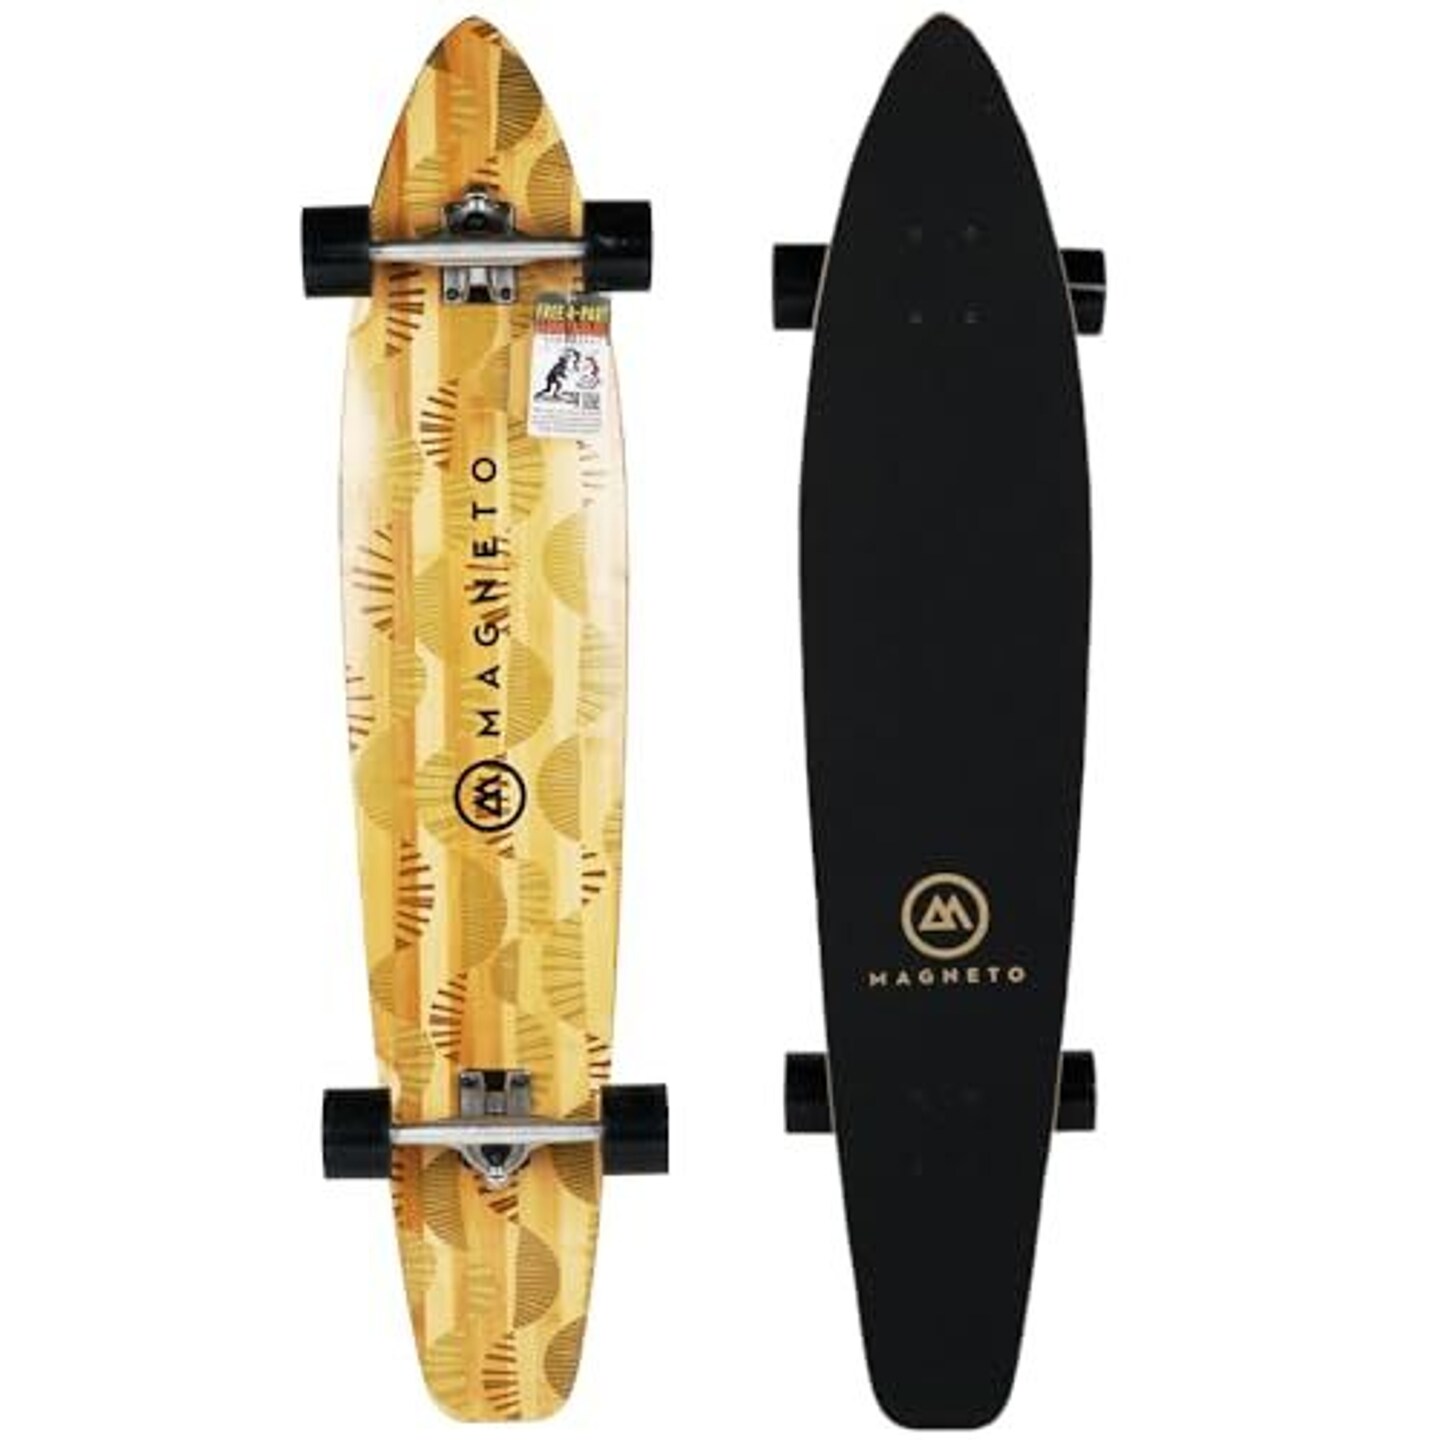 Magneto 44 inch Kicktail Cruiser Longboard Skateboard | Bamboo and Hard Maple Deck | Made for Adults, Teens, and Kids (Earth Tones)